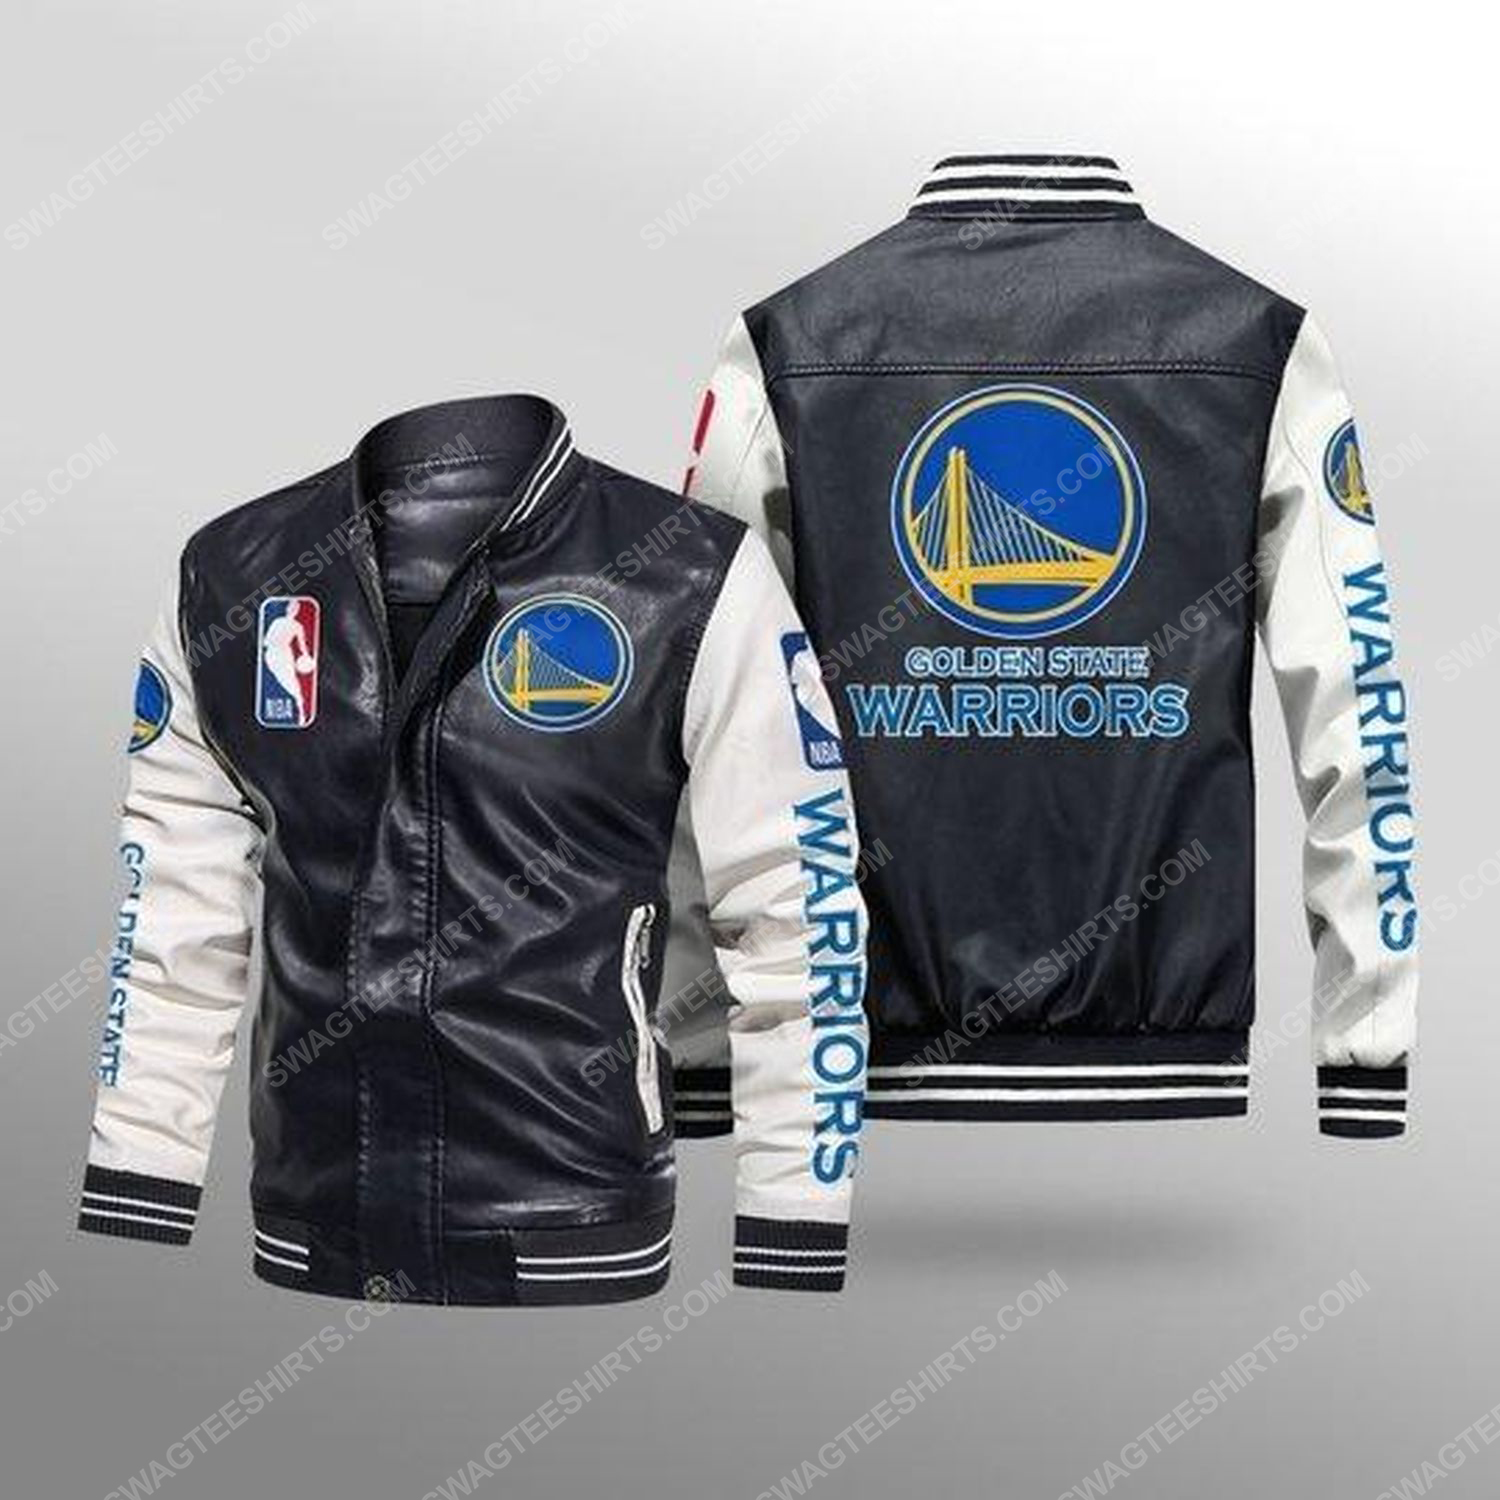 Golden state warriors all over print leather bomber jacket - white